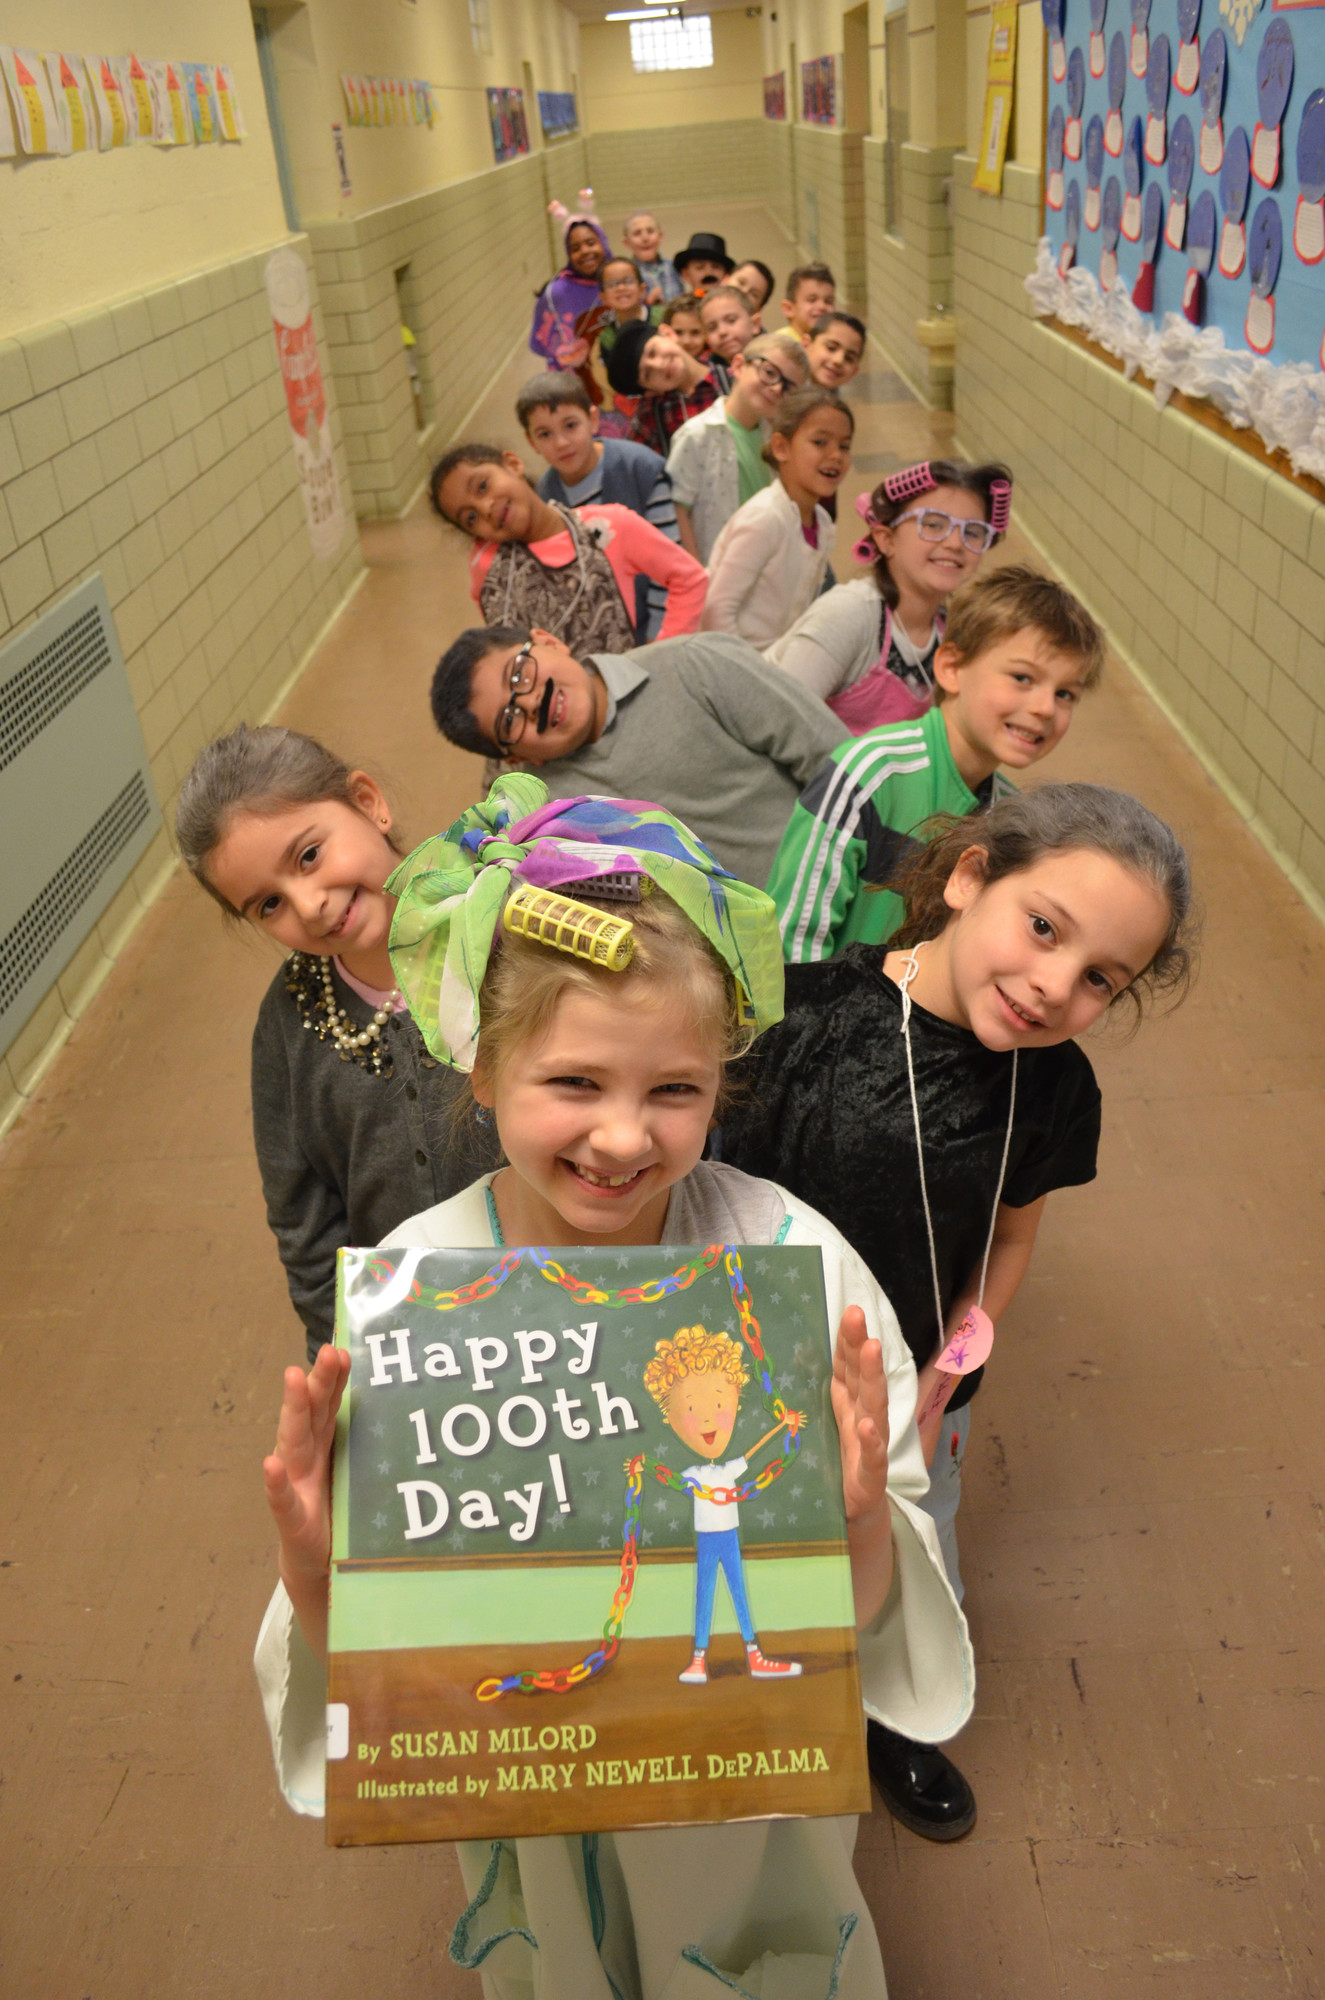 Makaila Schaefer, 7, of Mrs. Salvator’s first grade class posed with the “Happy 100th Day” book.